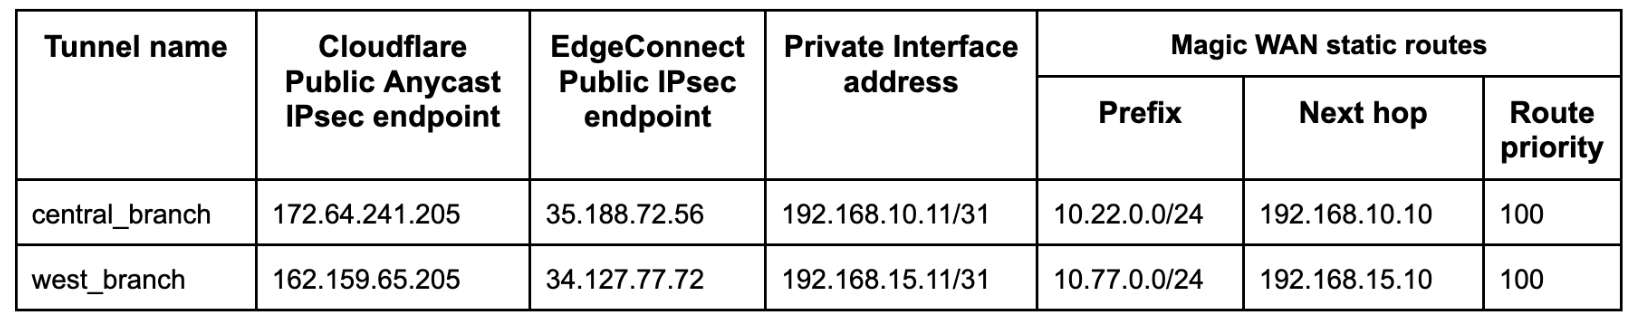 IPsec tunnel values for east and west branches